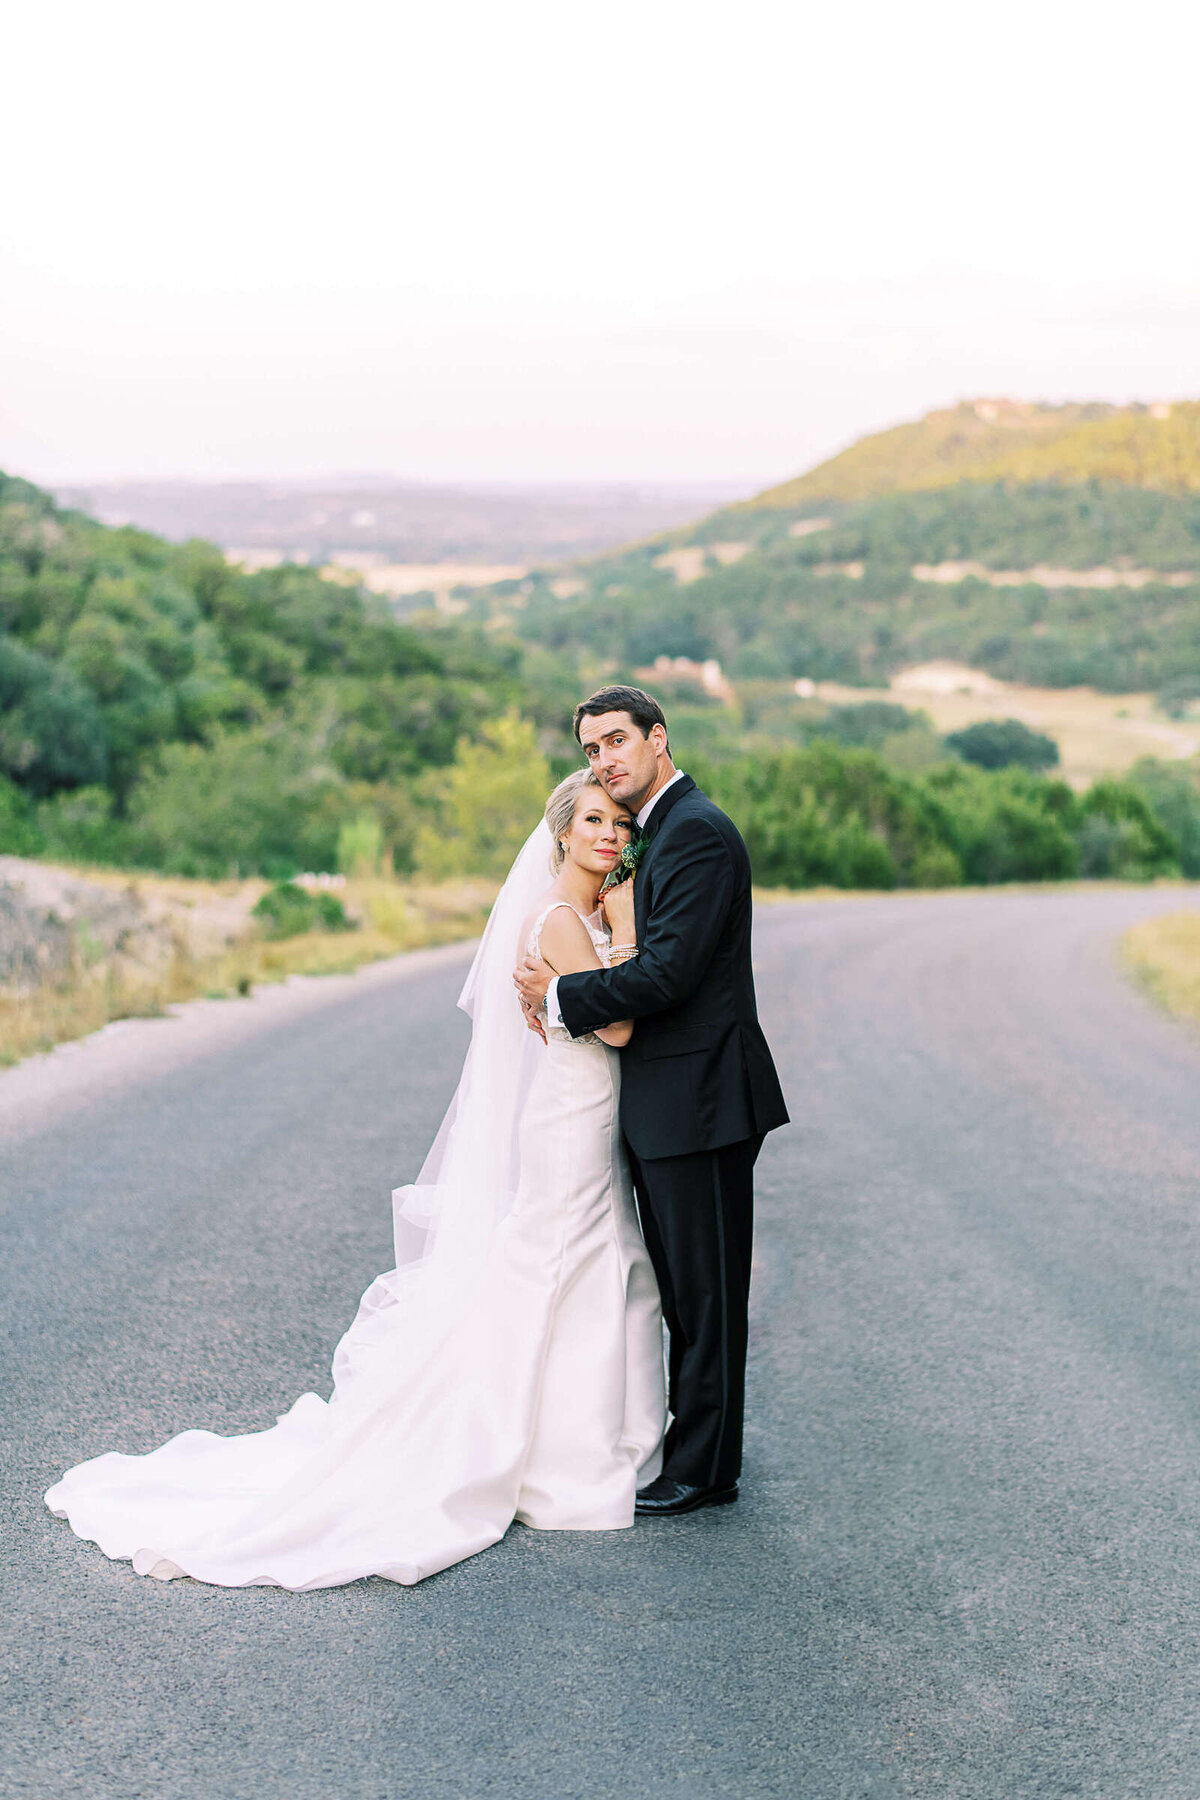 Bride and groom embrace overlooking Texas hill country landscape